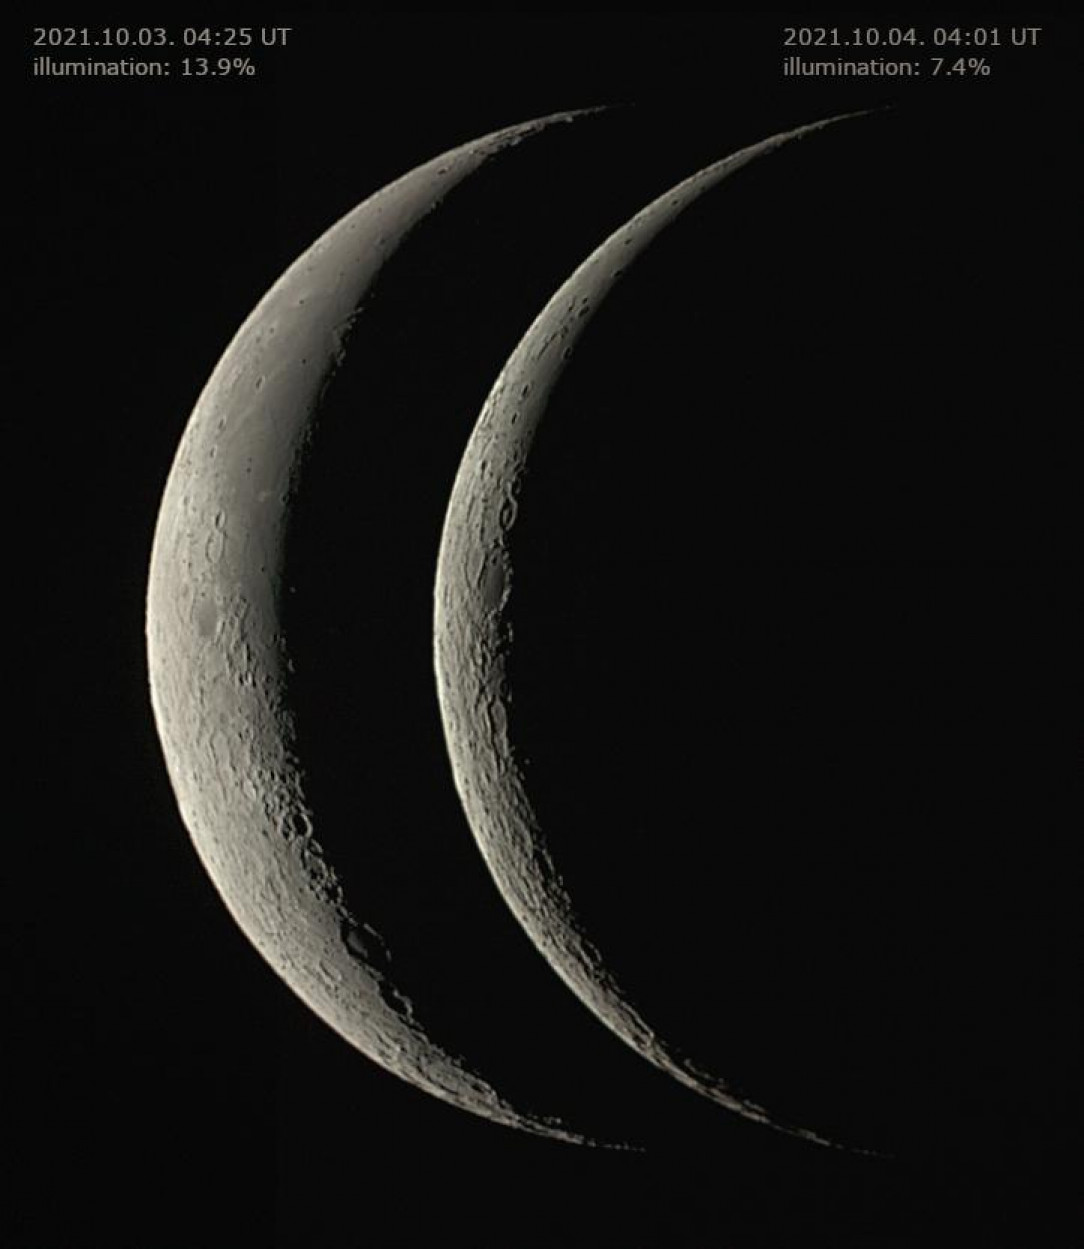 The waning Moon 1 day apart